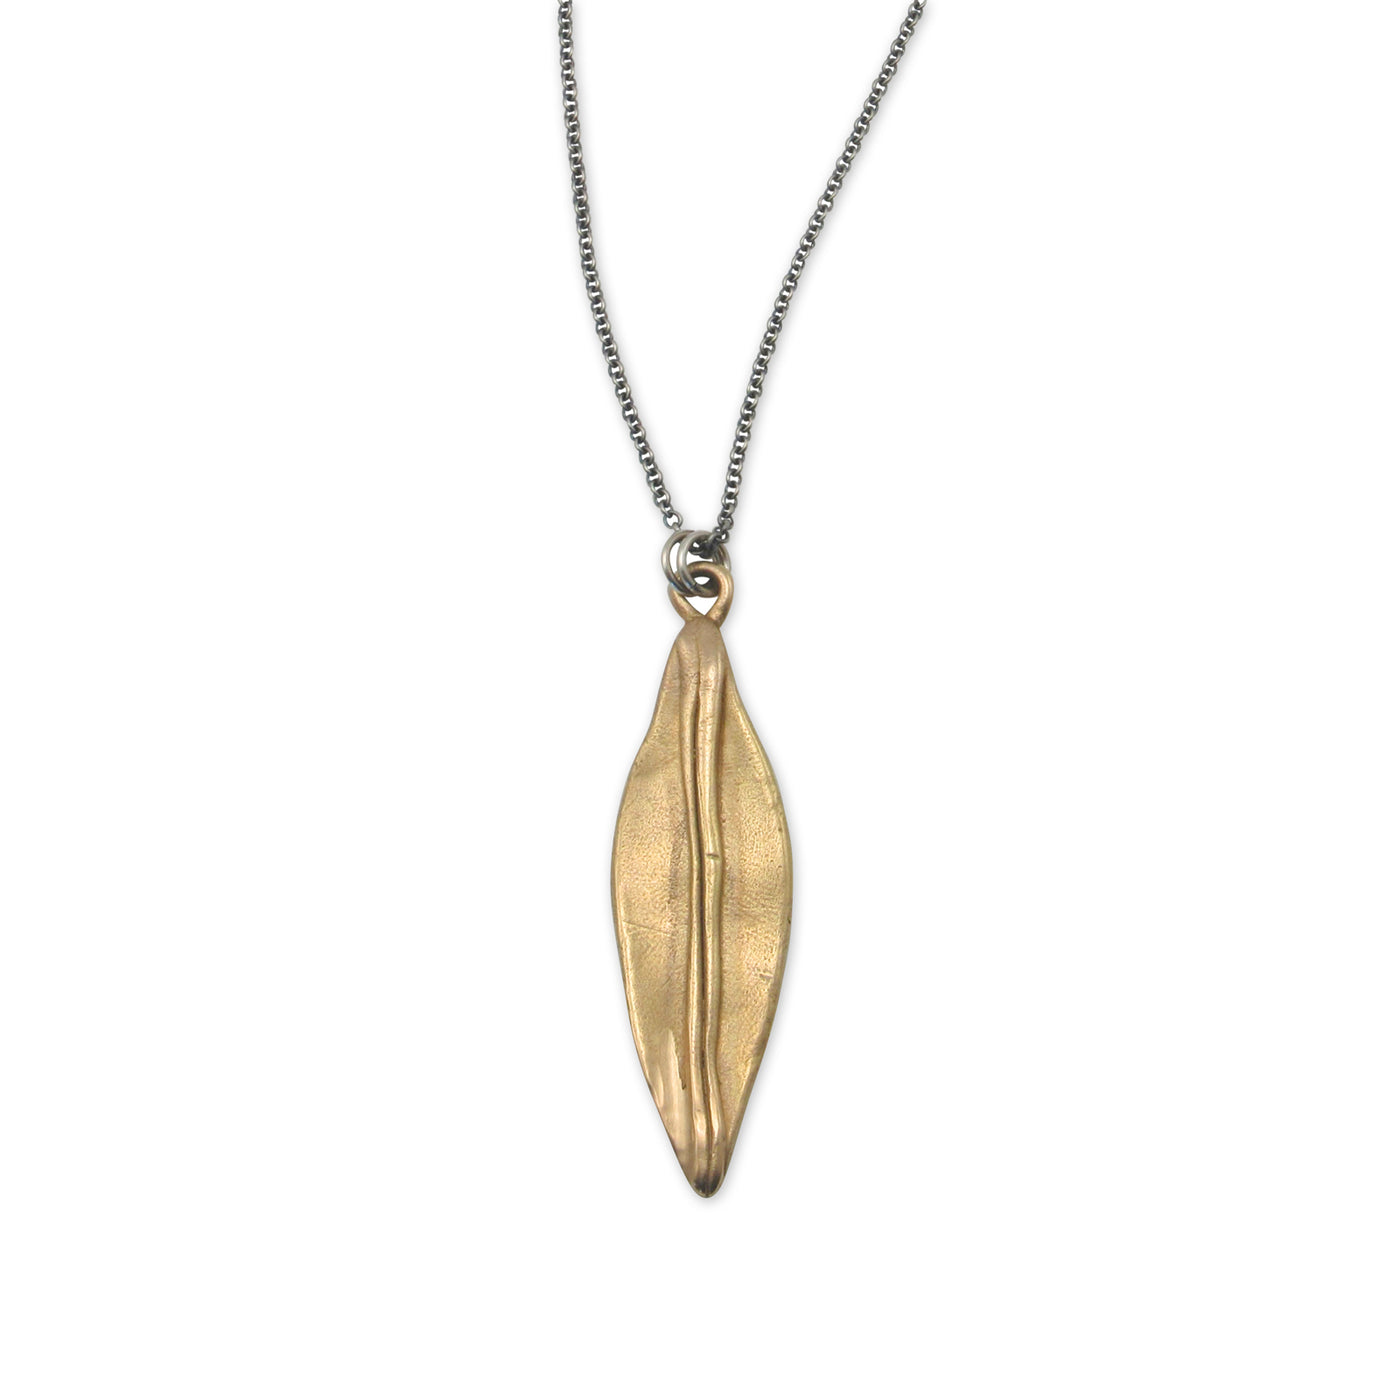 Kristen Mara hand carved marquis pendant necklace